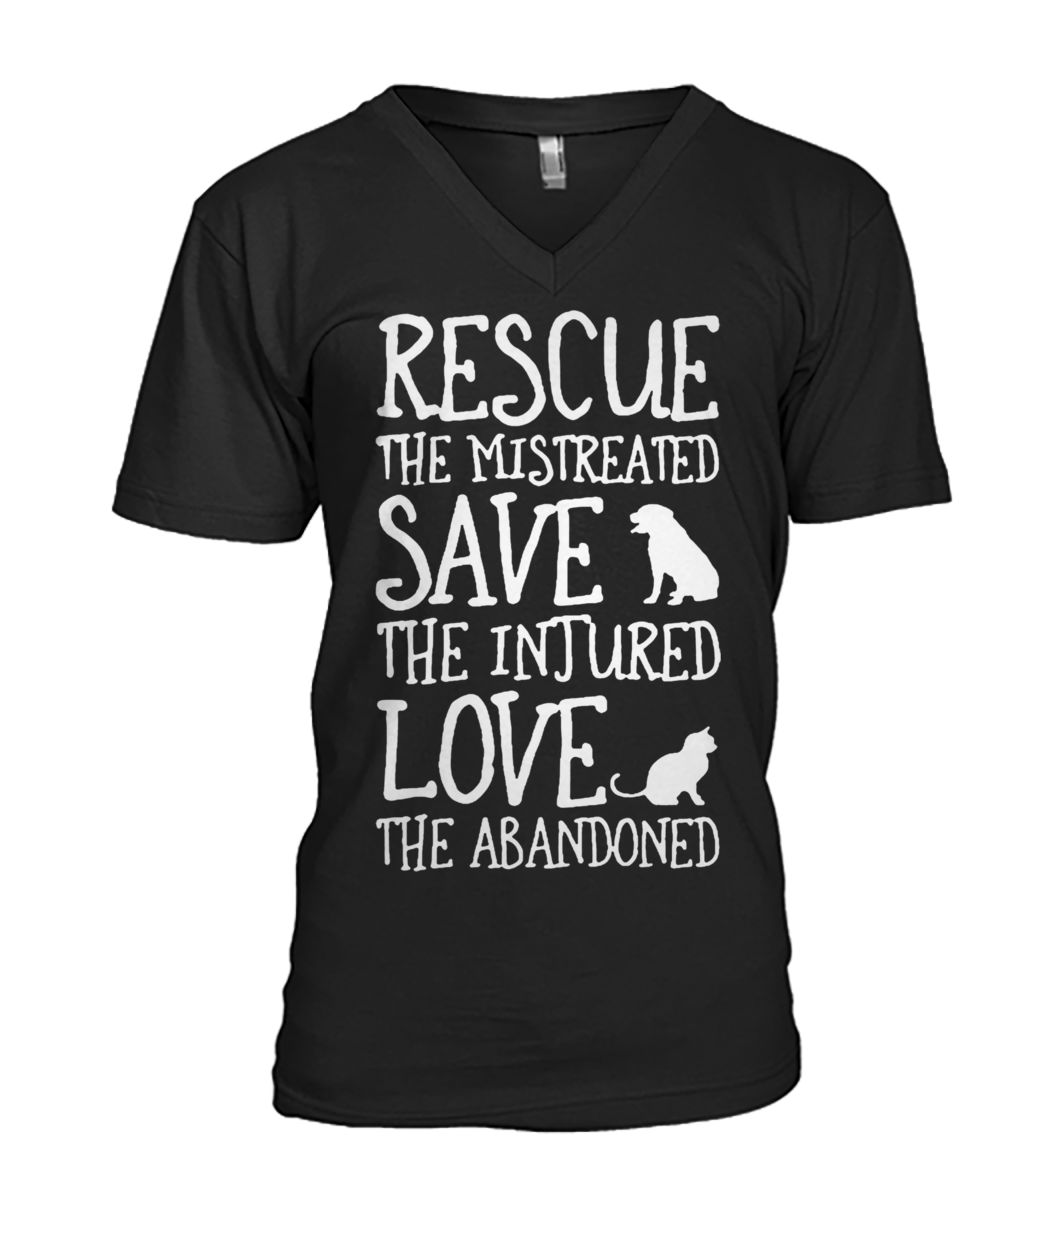 Rescue the mistreated save the injured love the abandoned mens v-neck